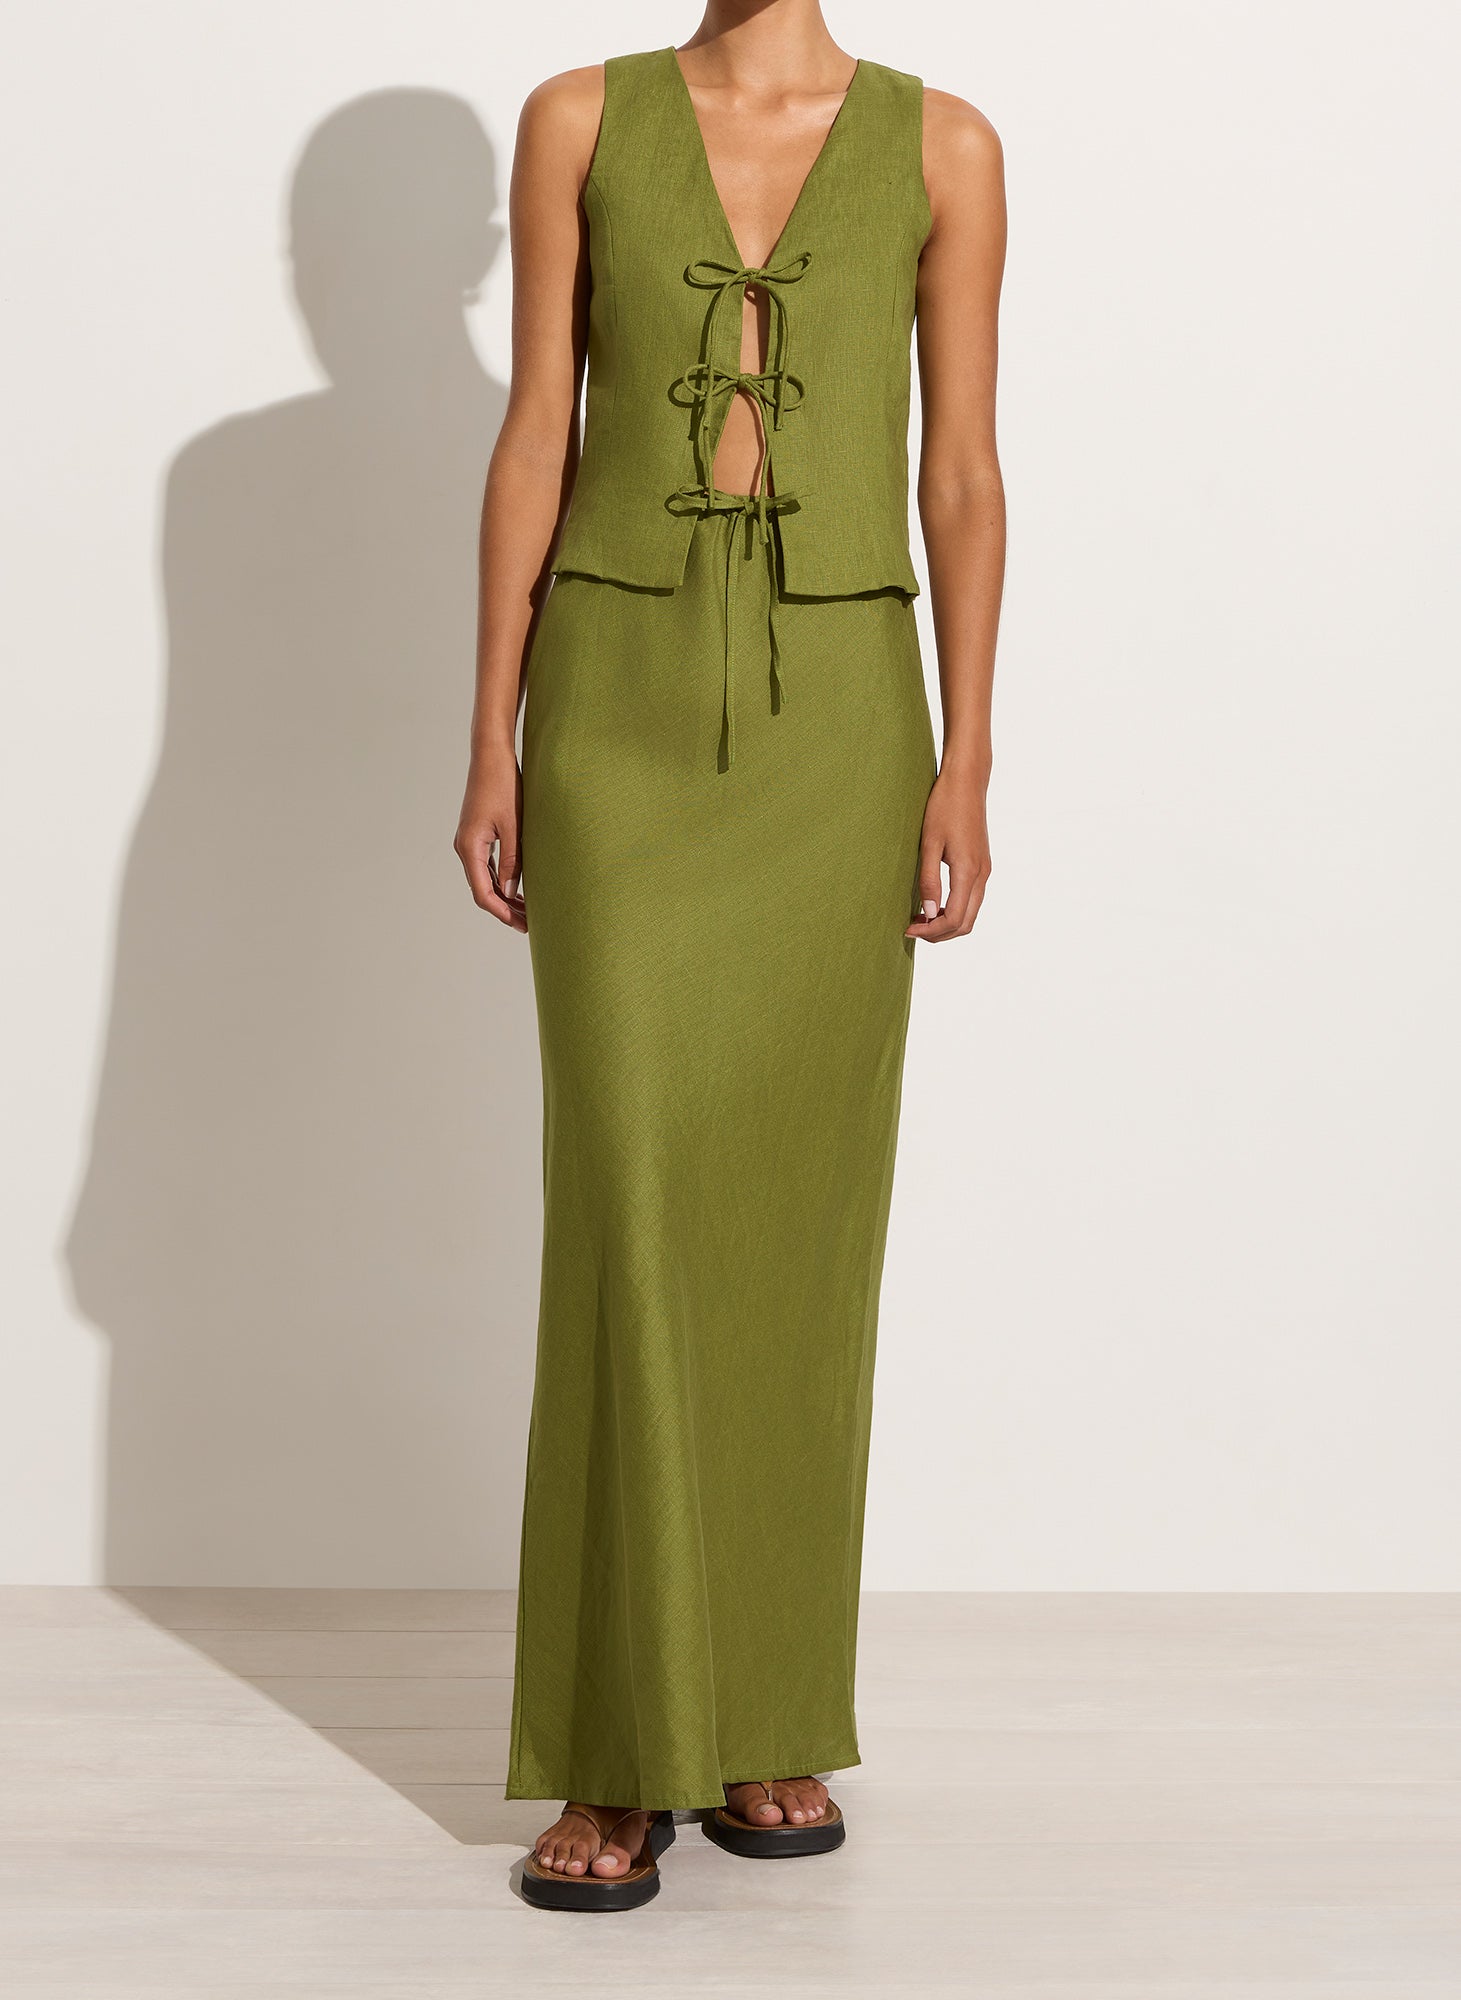 Faithfull The Brand Cataline Skirt in Palm Green available at TNT The New Trend Australia